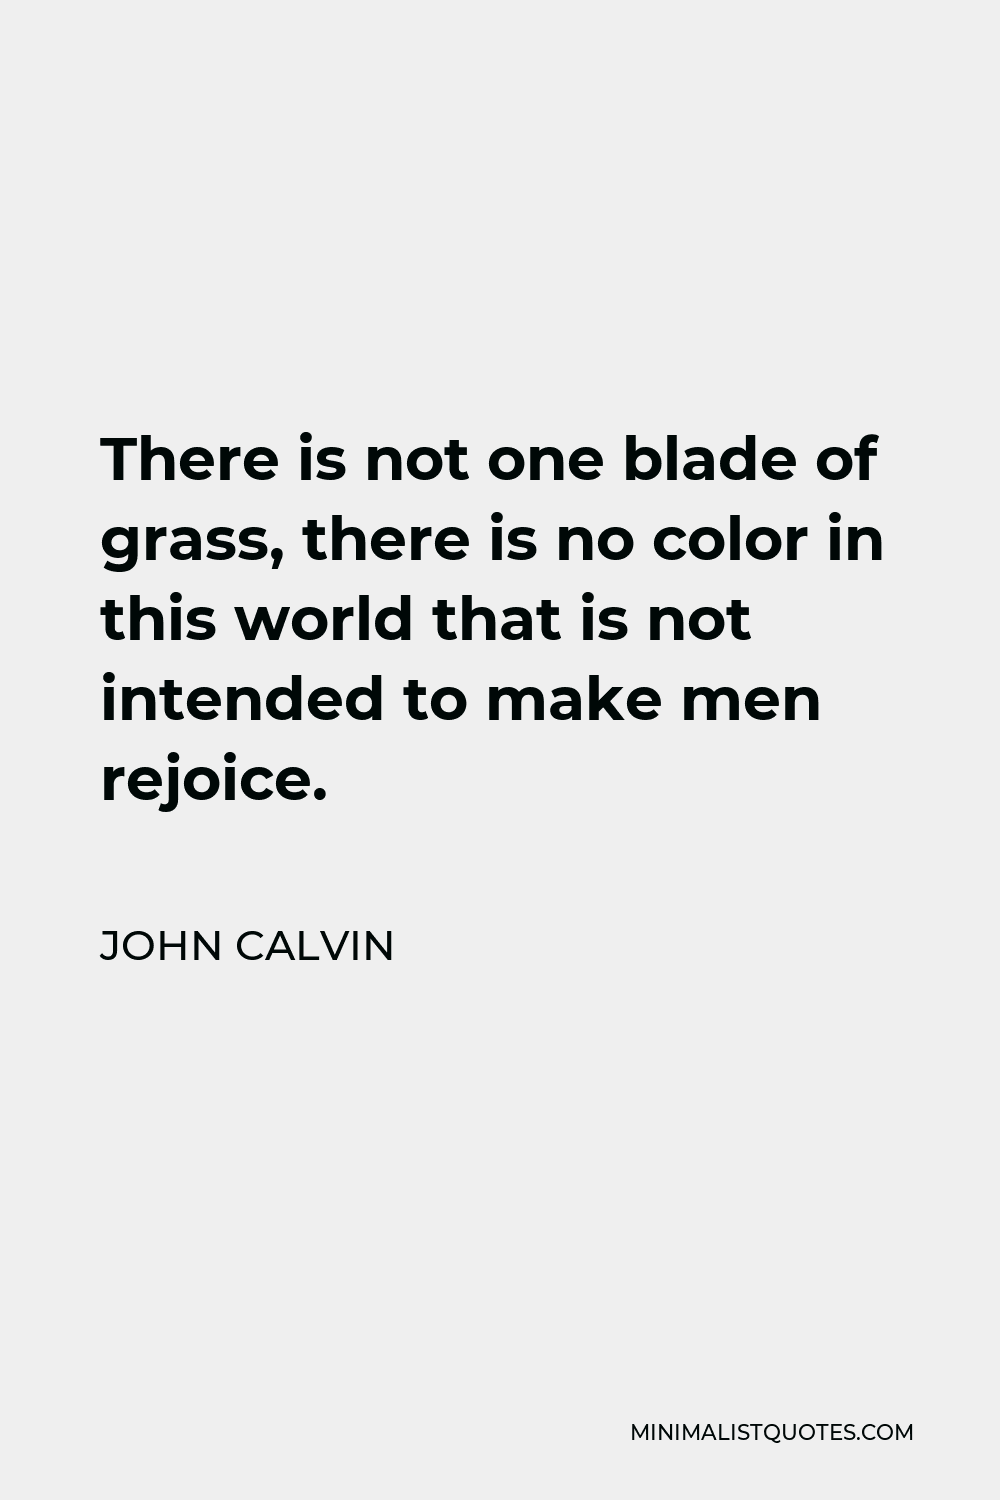 John Calvin Quote - There is not one blade of grass, there is no color in this world that is not intended to make men rejoice.